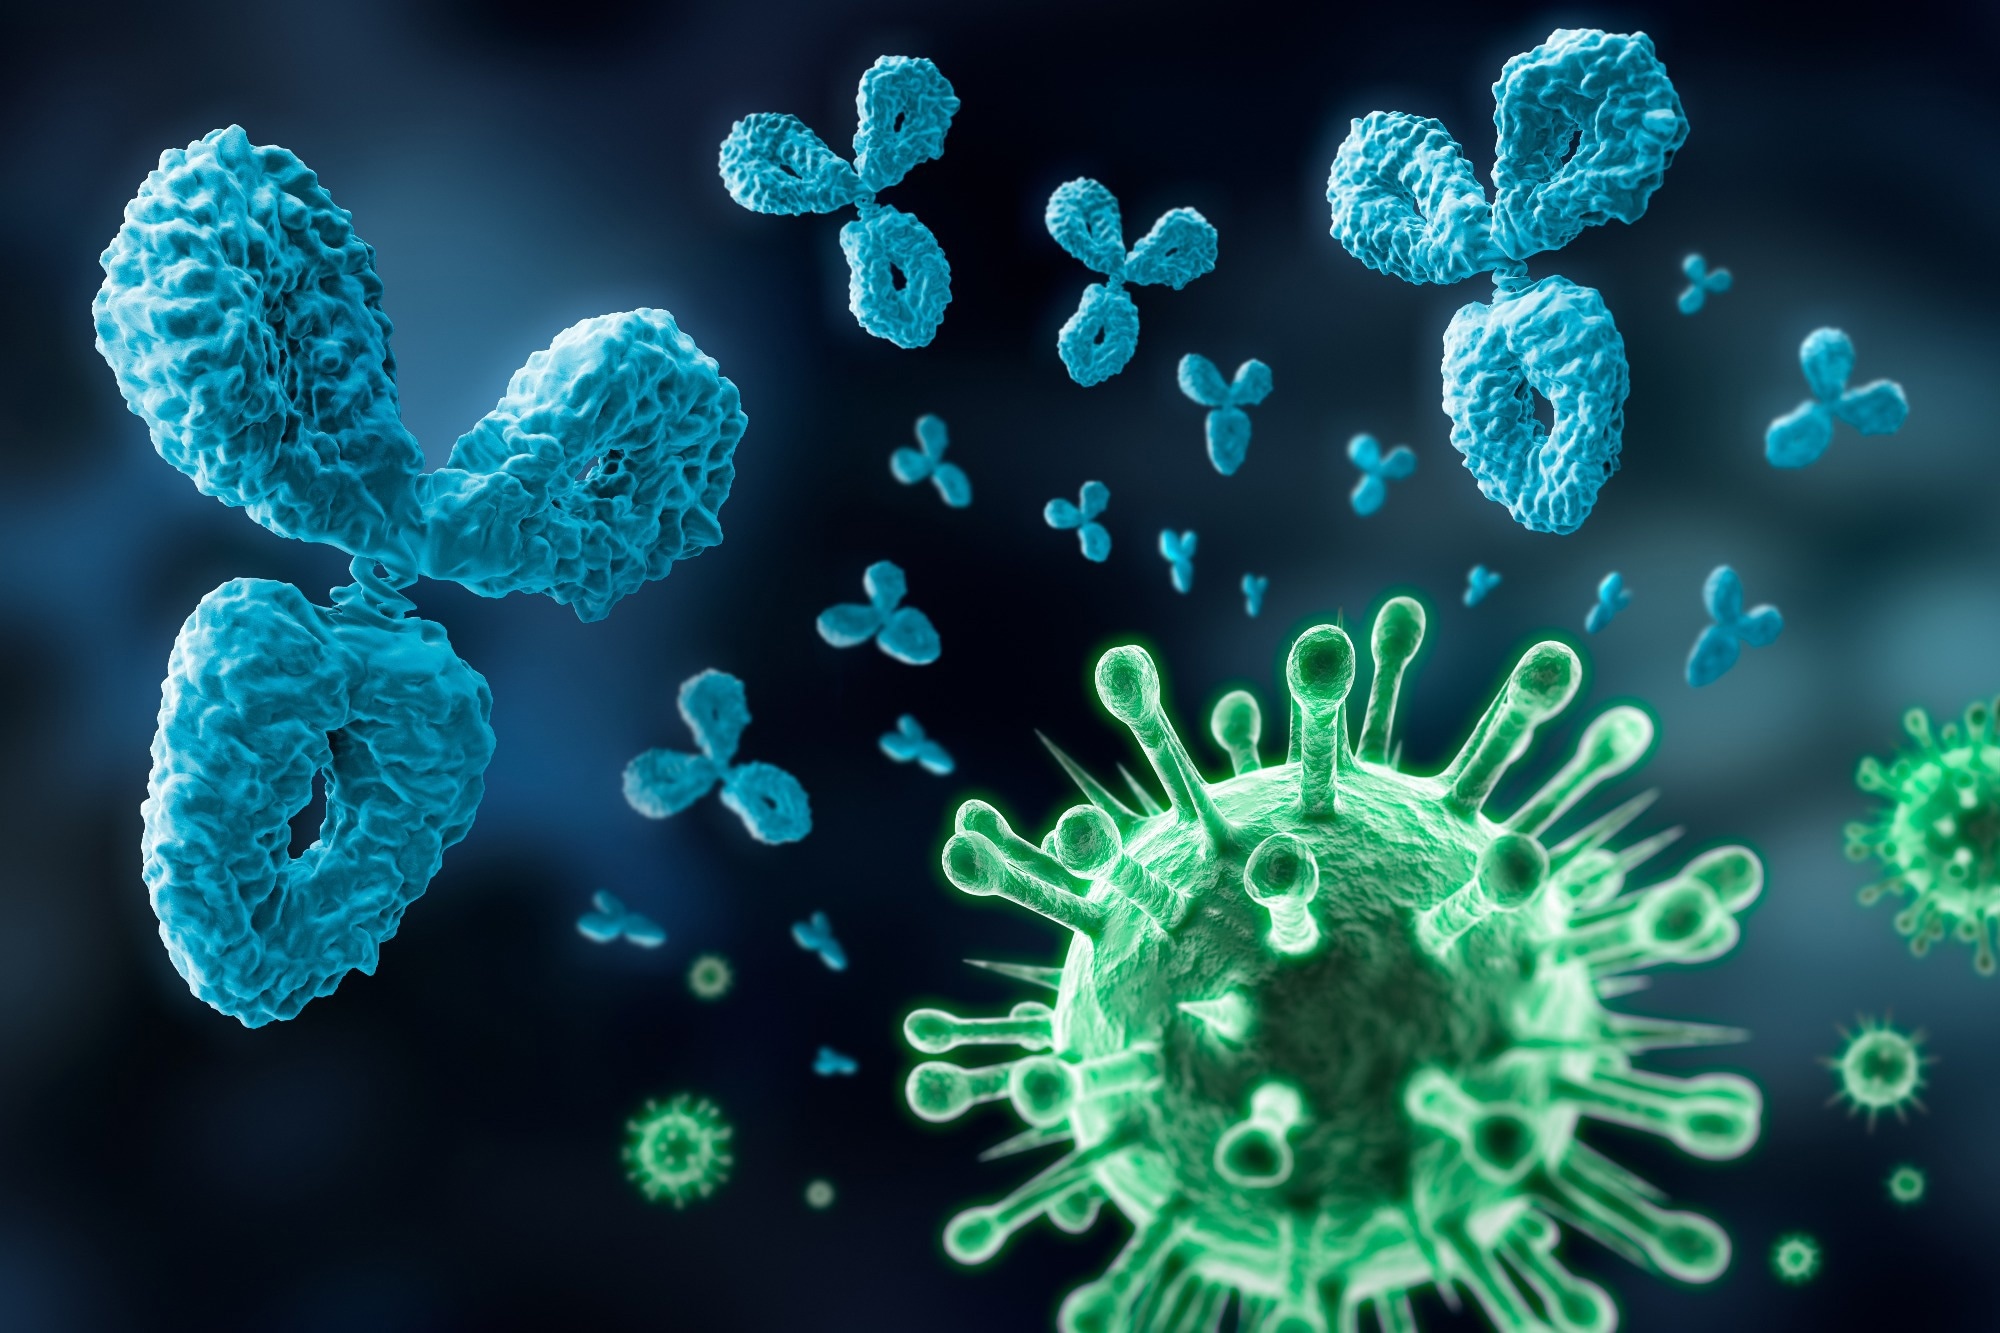 Letter: Autoantibodies against chemokines post-SARS-CoV-2 infection correlate with disease course. Image Credit: peterschreiber.media / Shutterstock